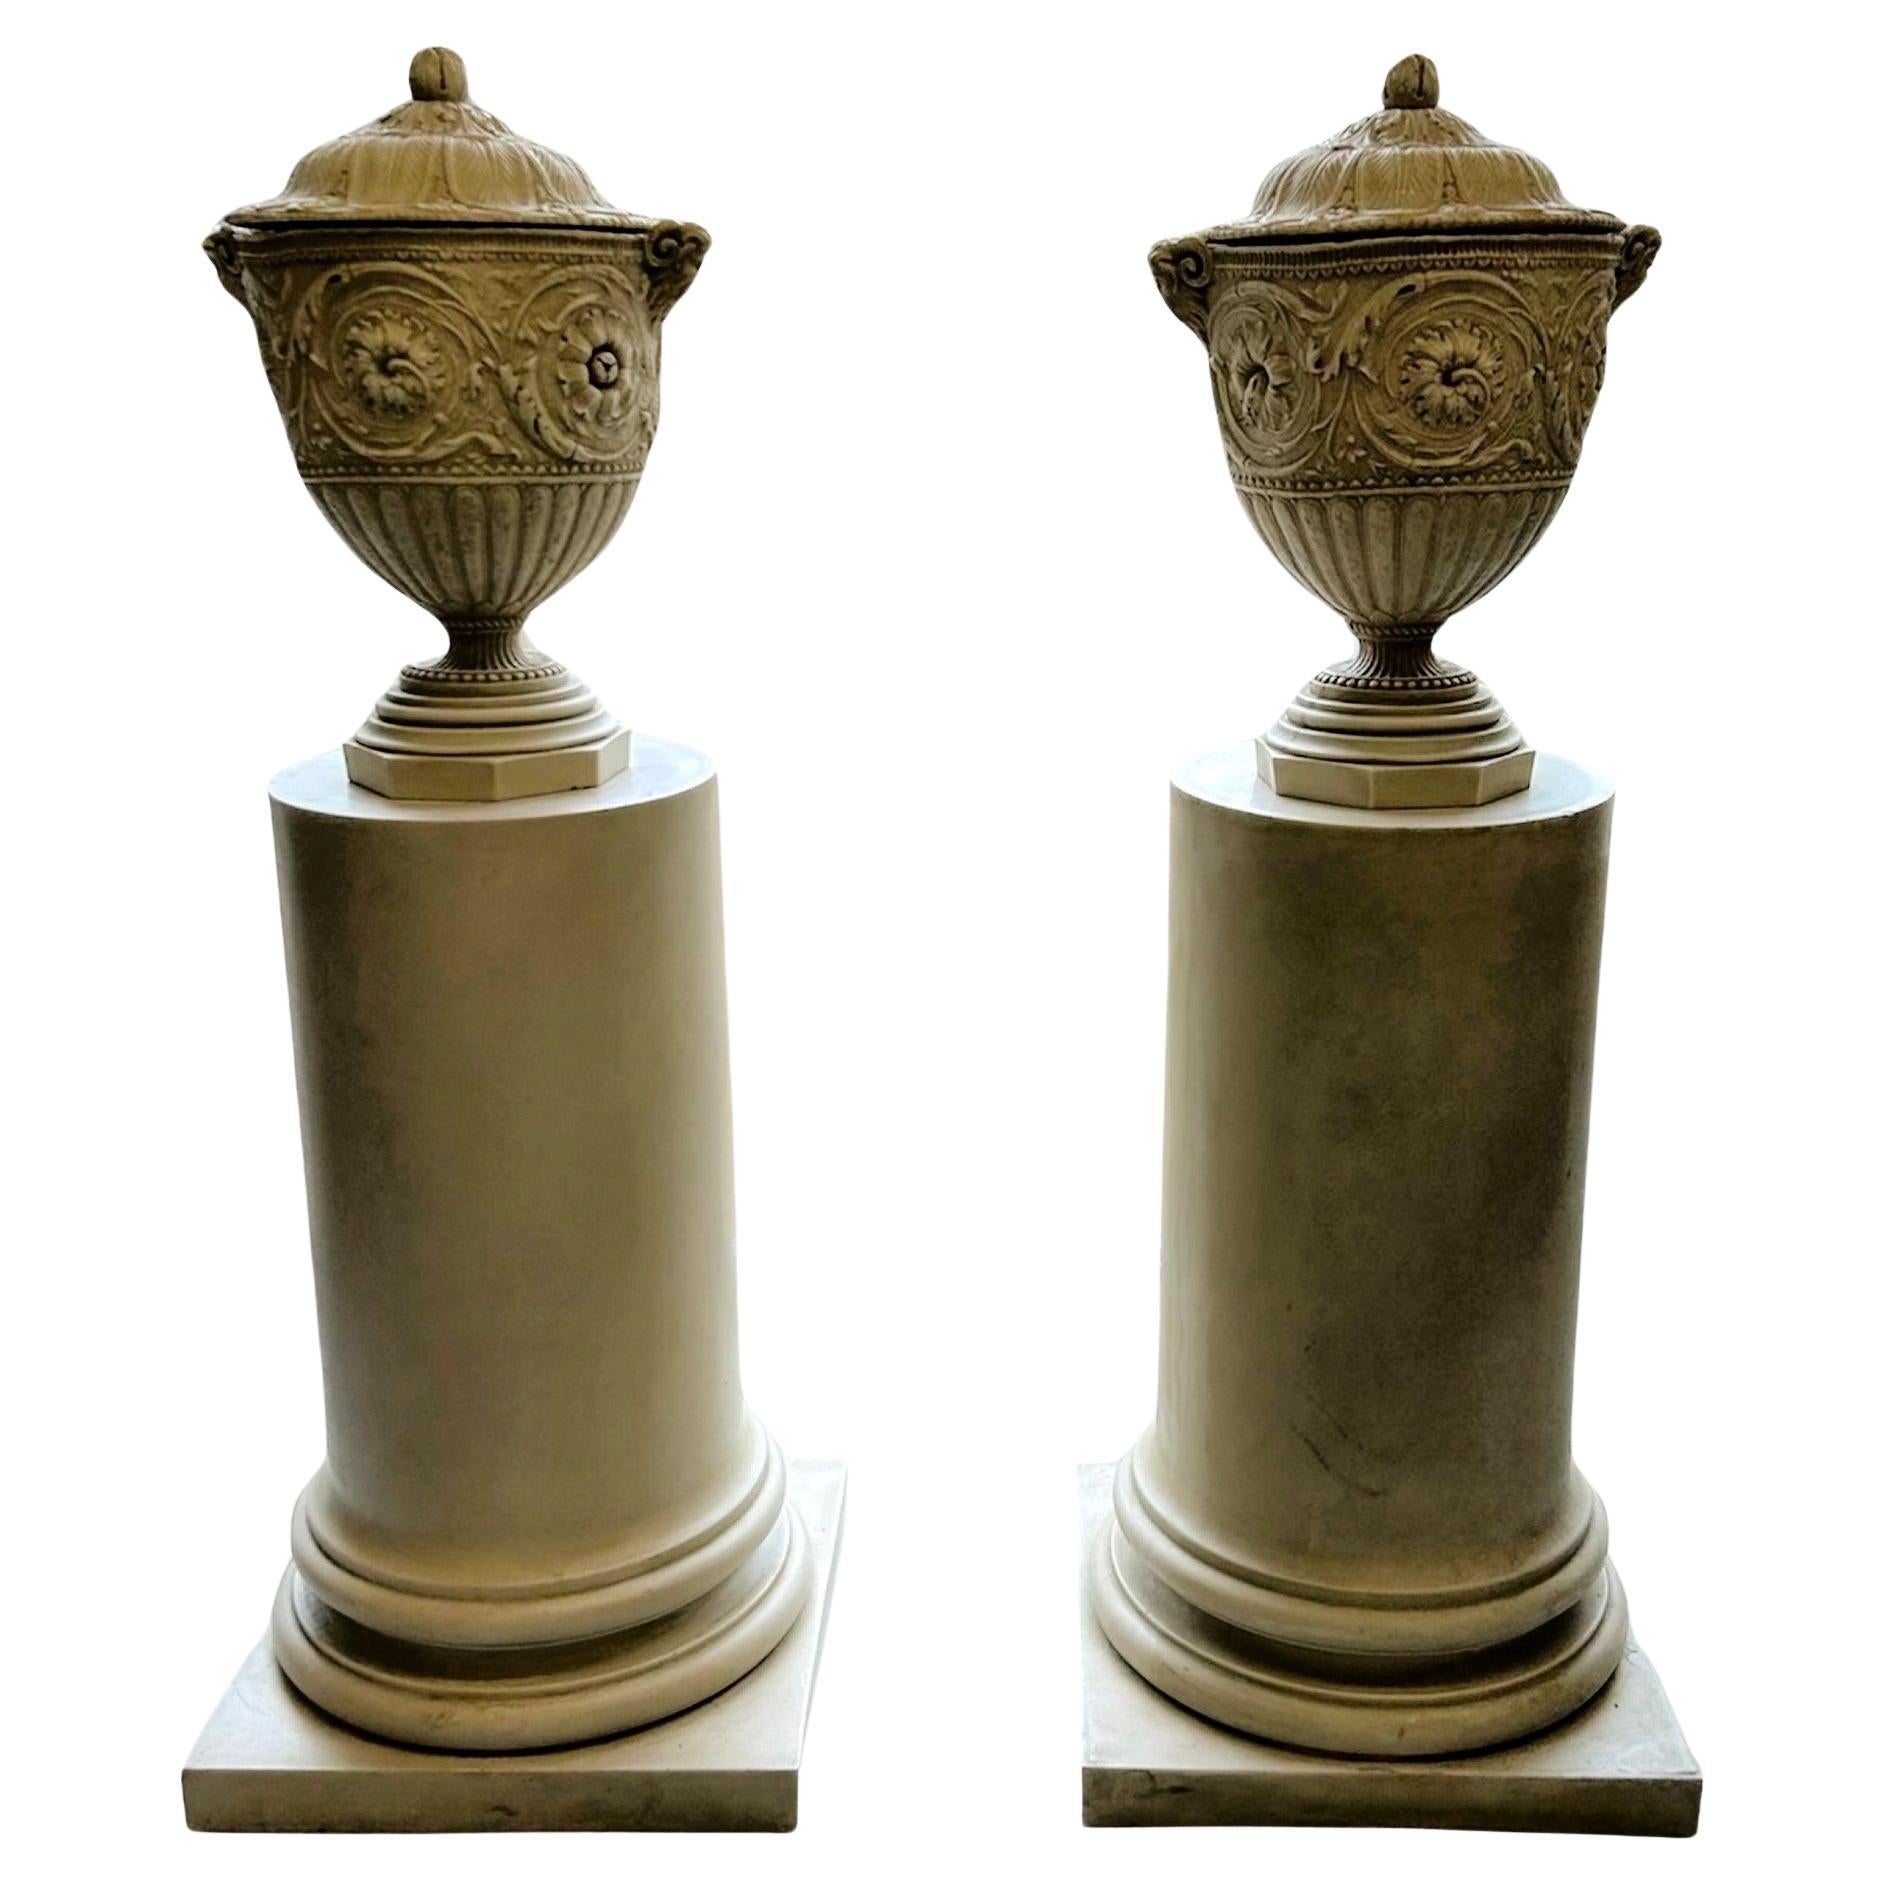 A Pair of Decorative Pedestals with Lidded Urns For Sale